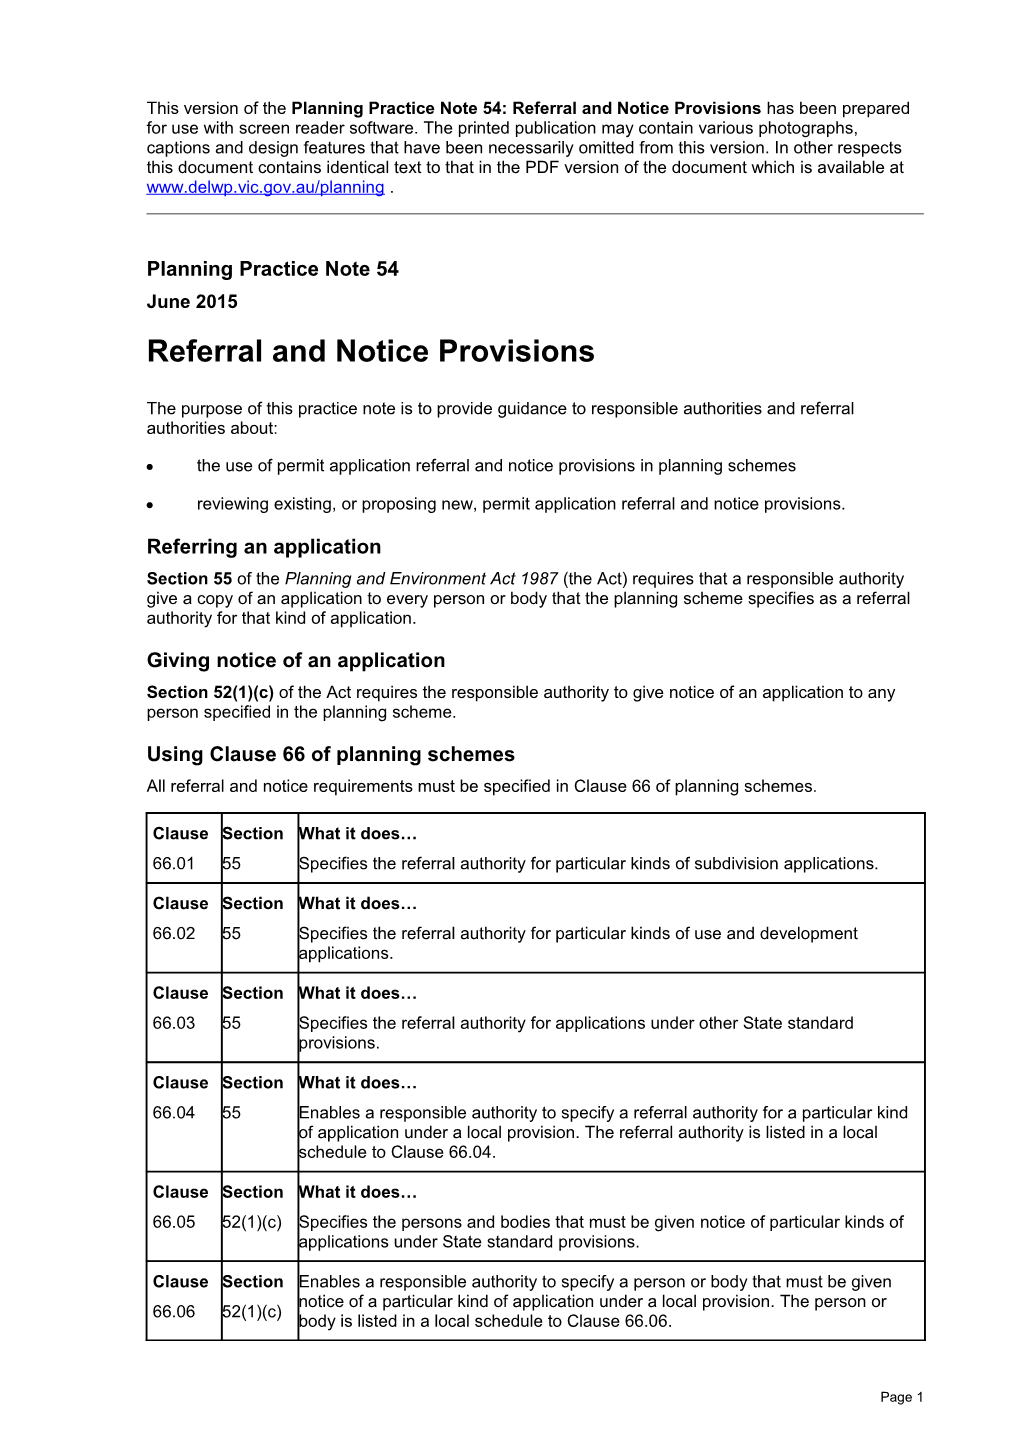 Planning Practice Note 54: Referral and Notice Provisions